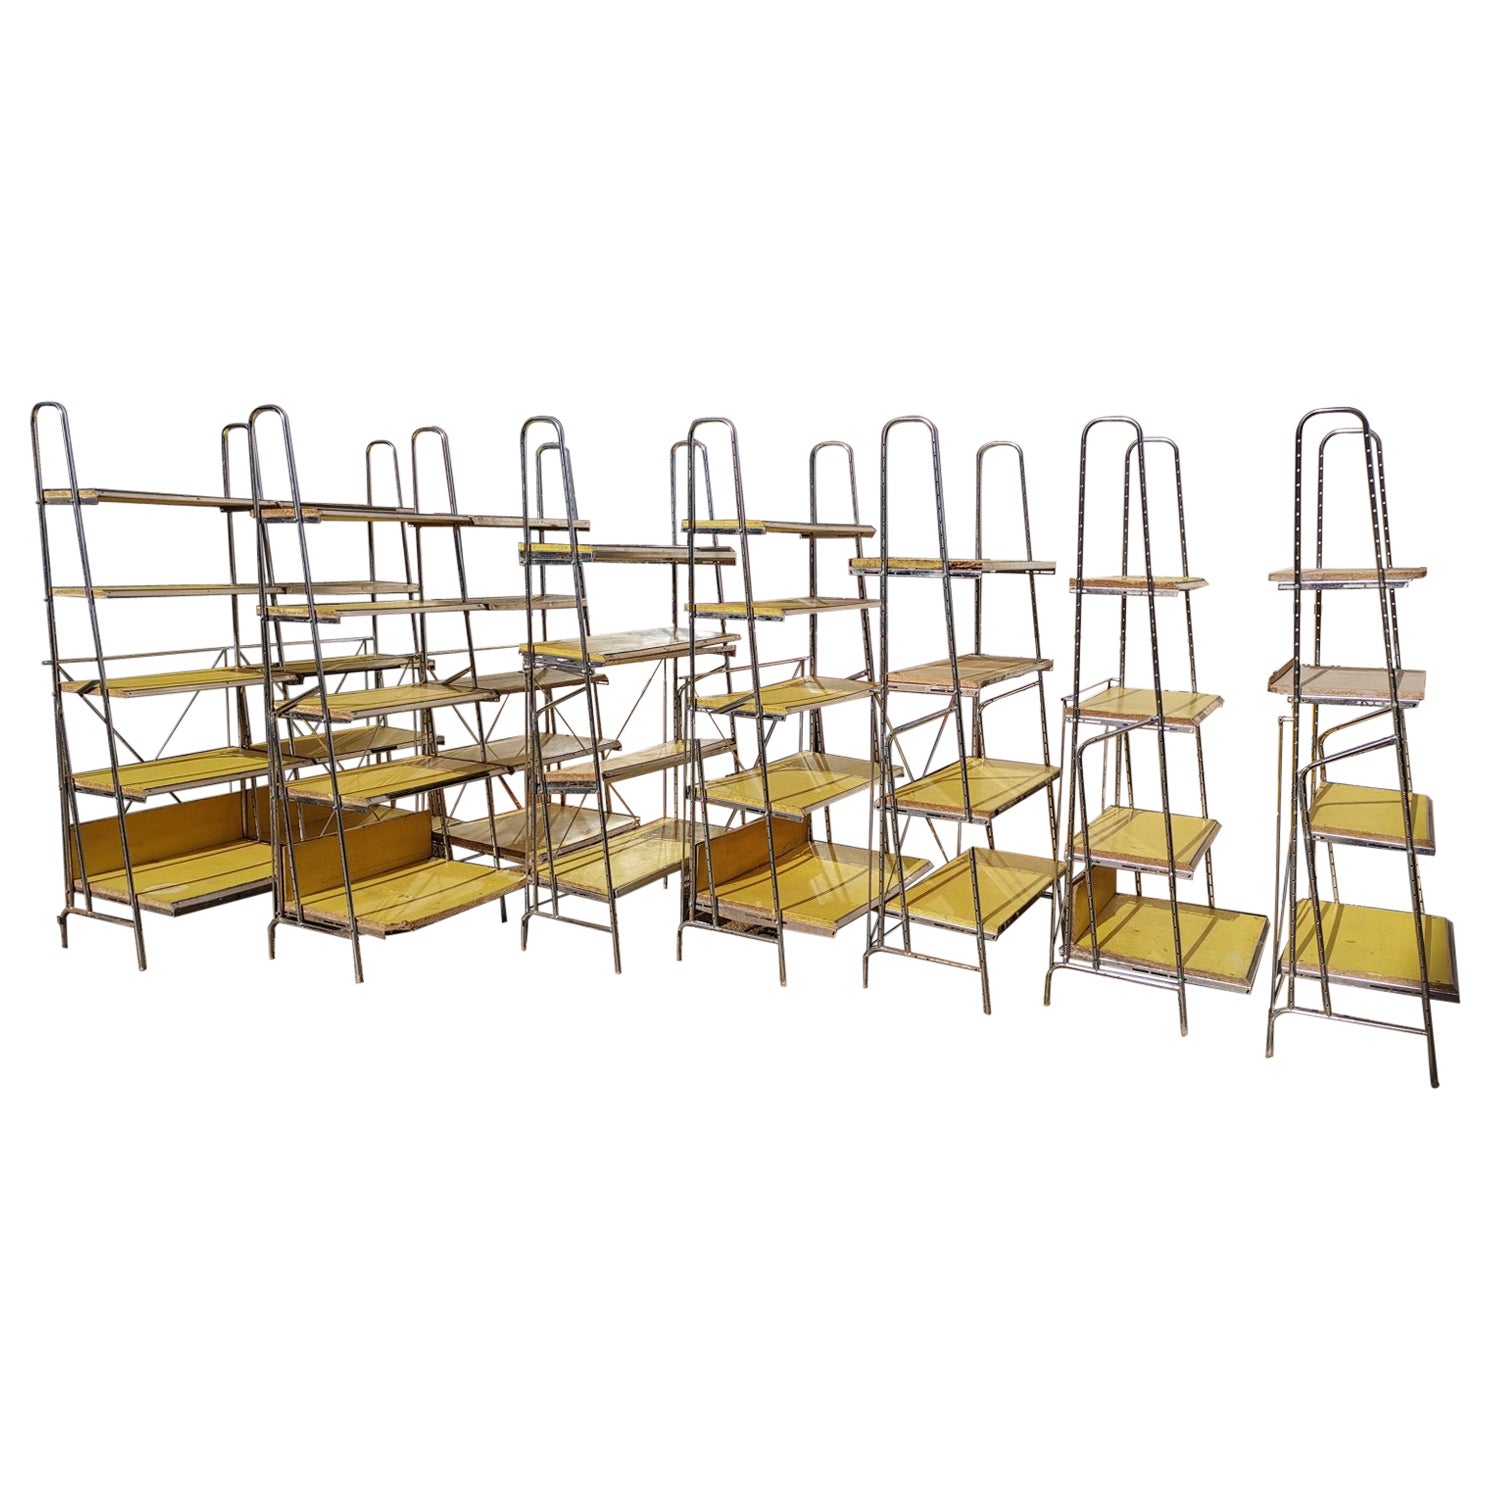 Stylish Midcentury Chrome on Steel Shop Shelving with Braced Back Supports For Sale